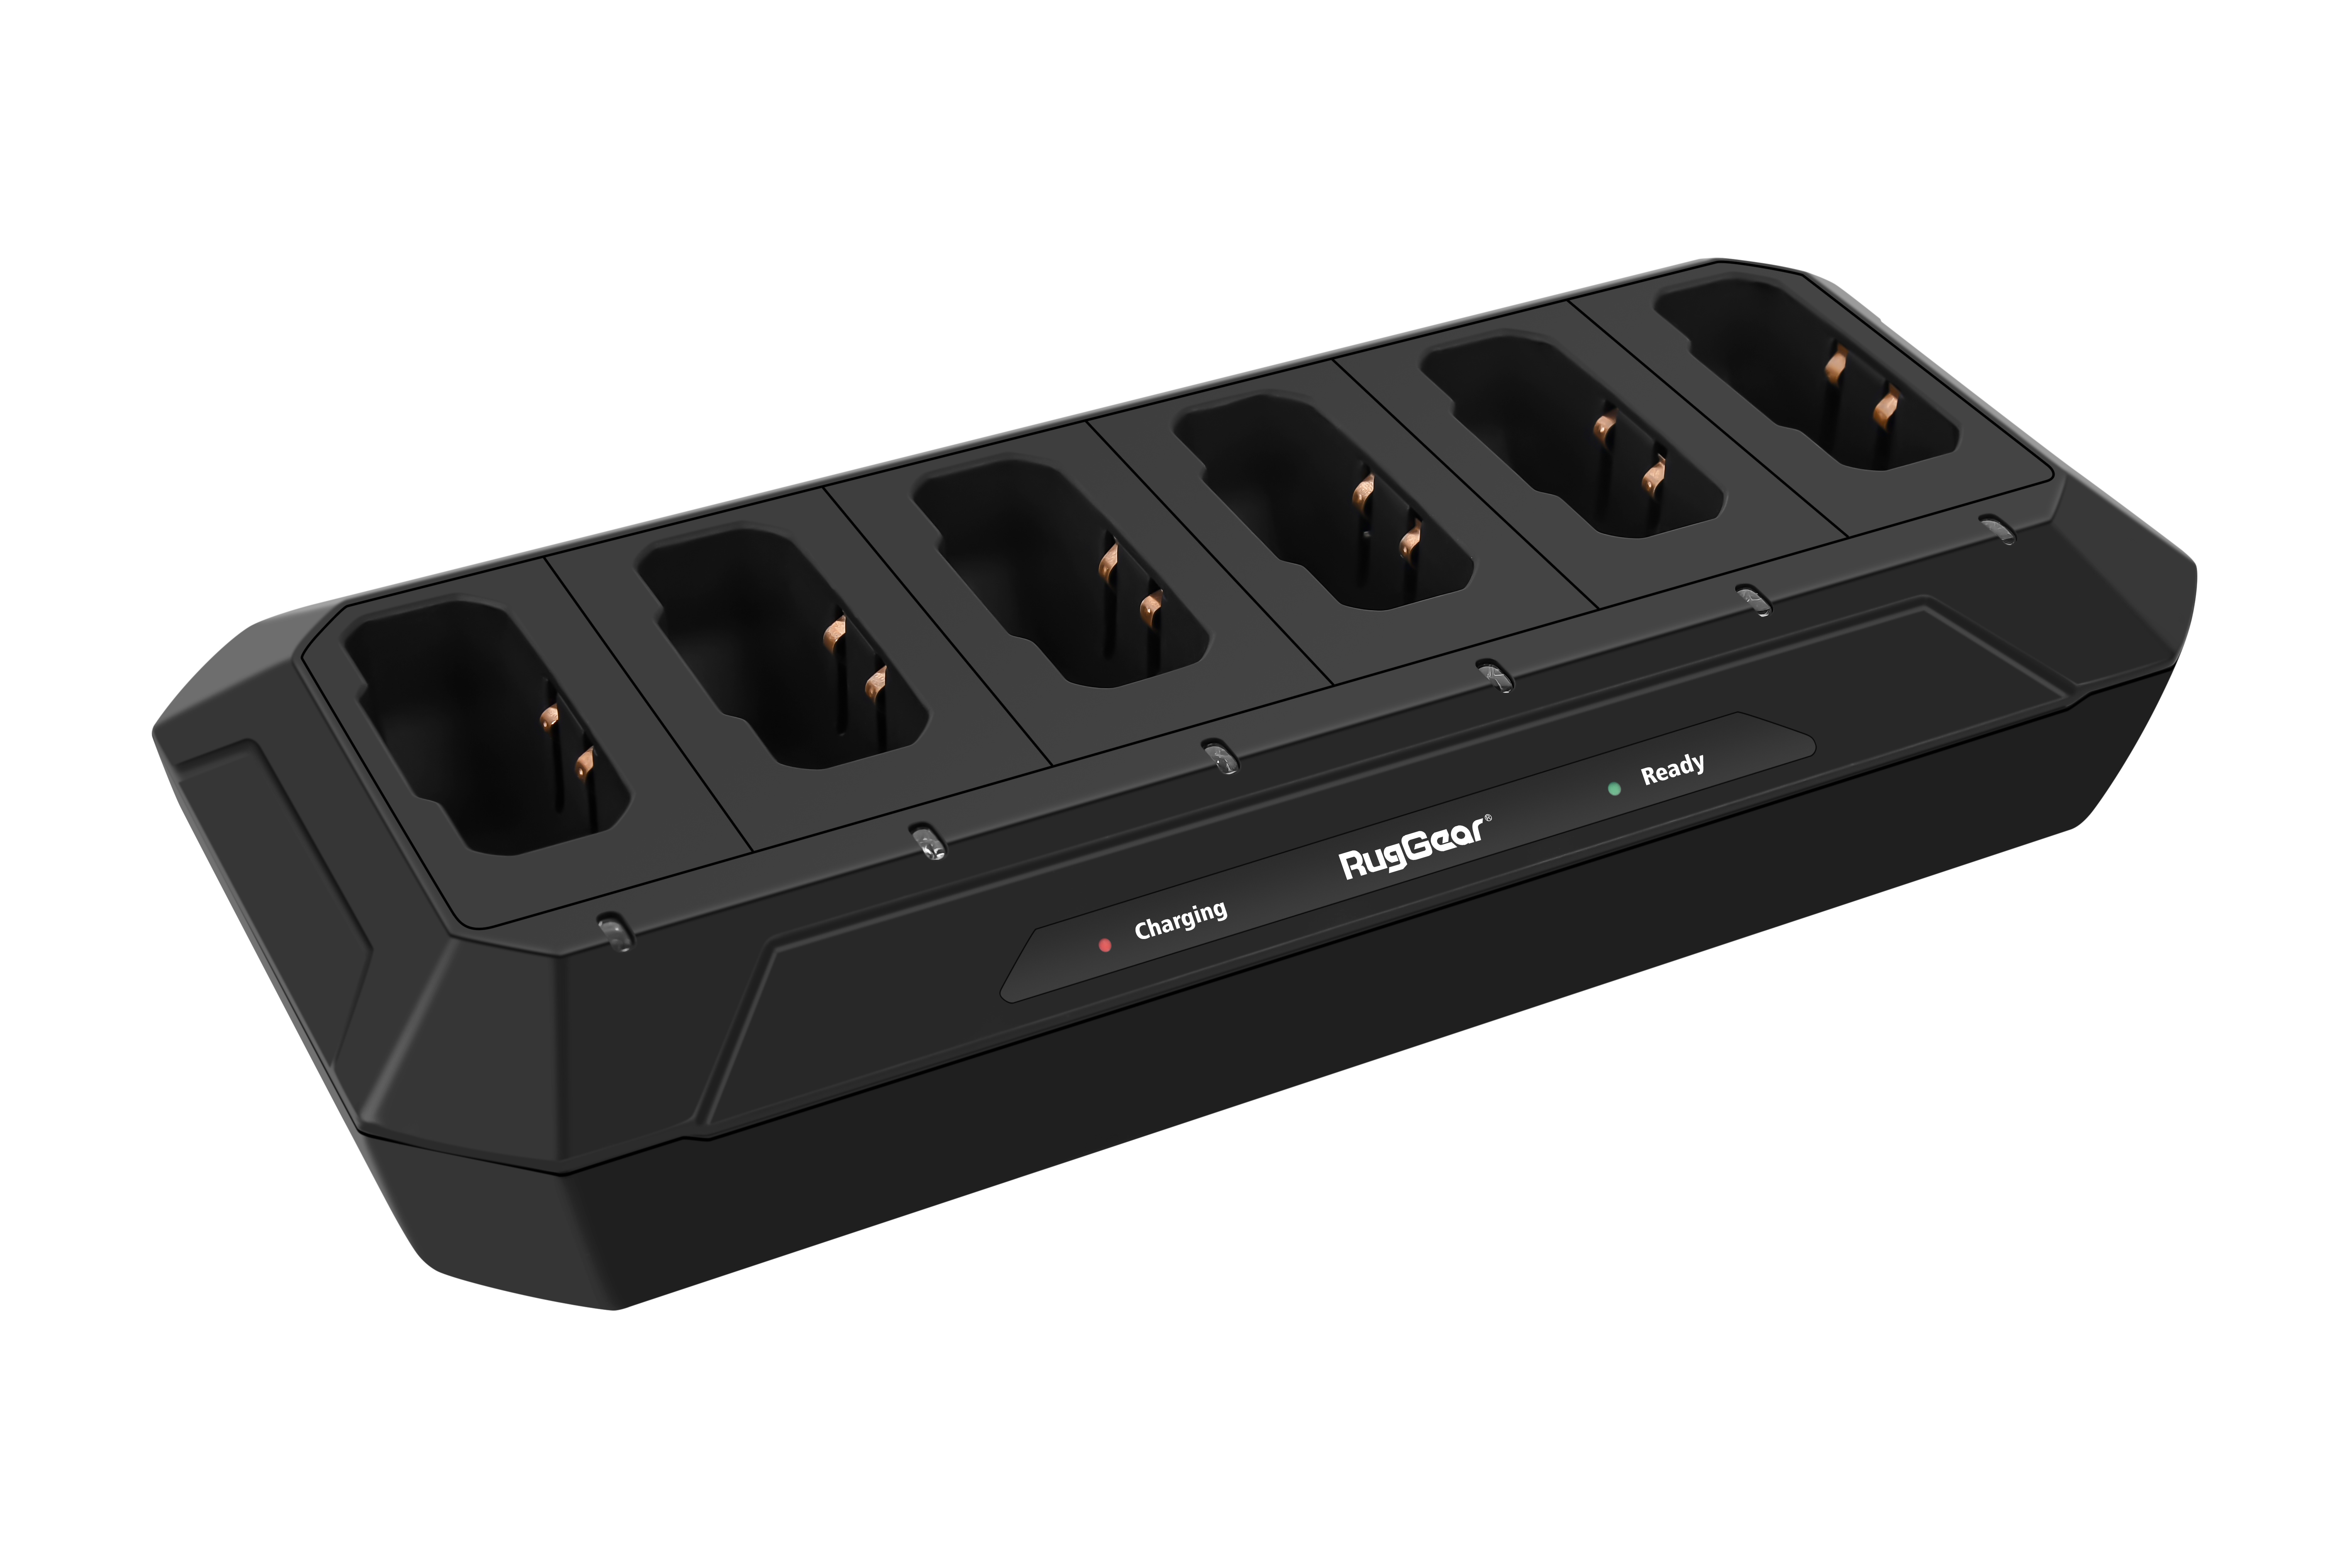 RG725 Multi Charger Dock